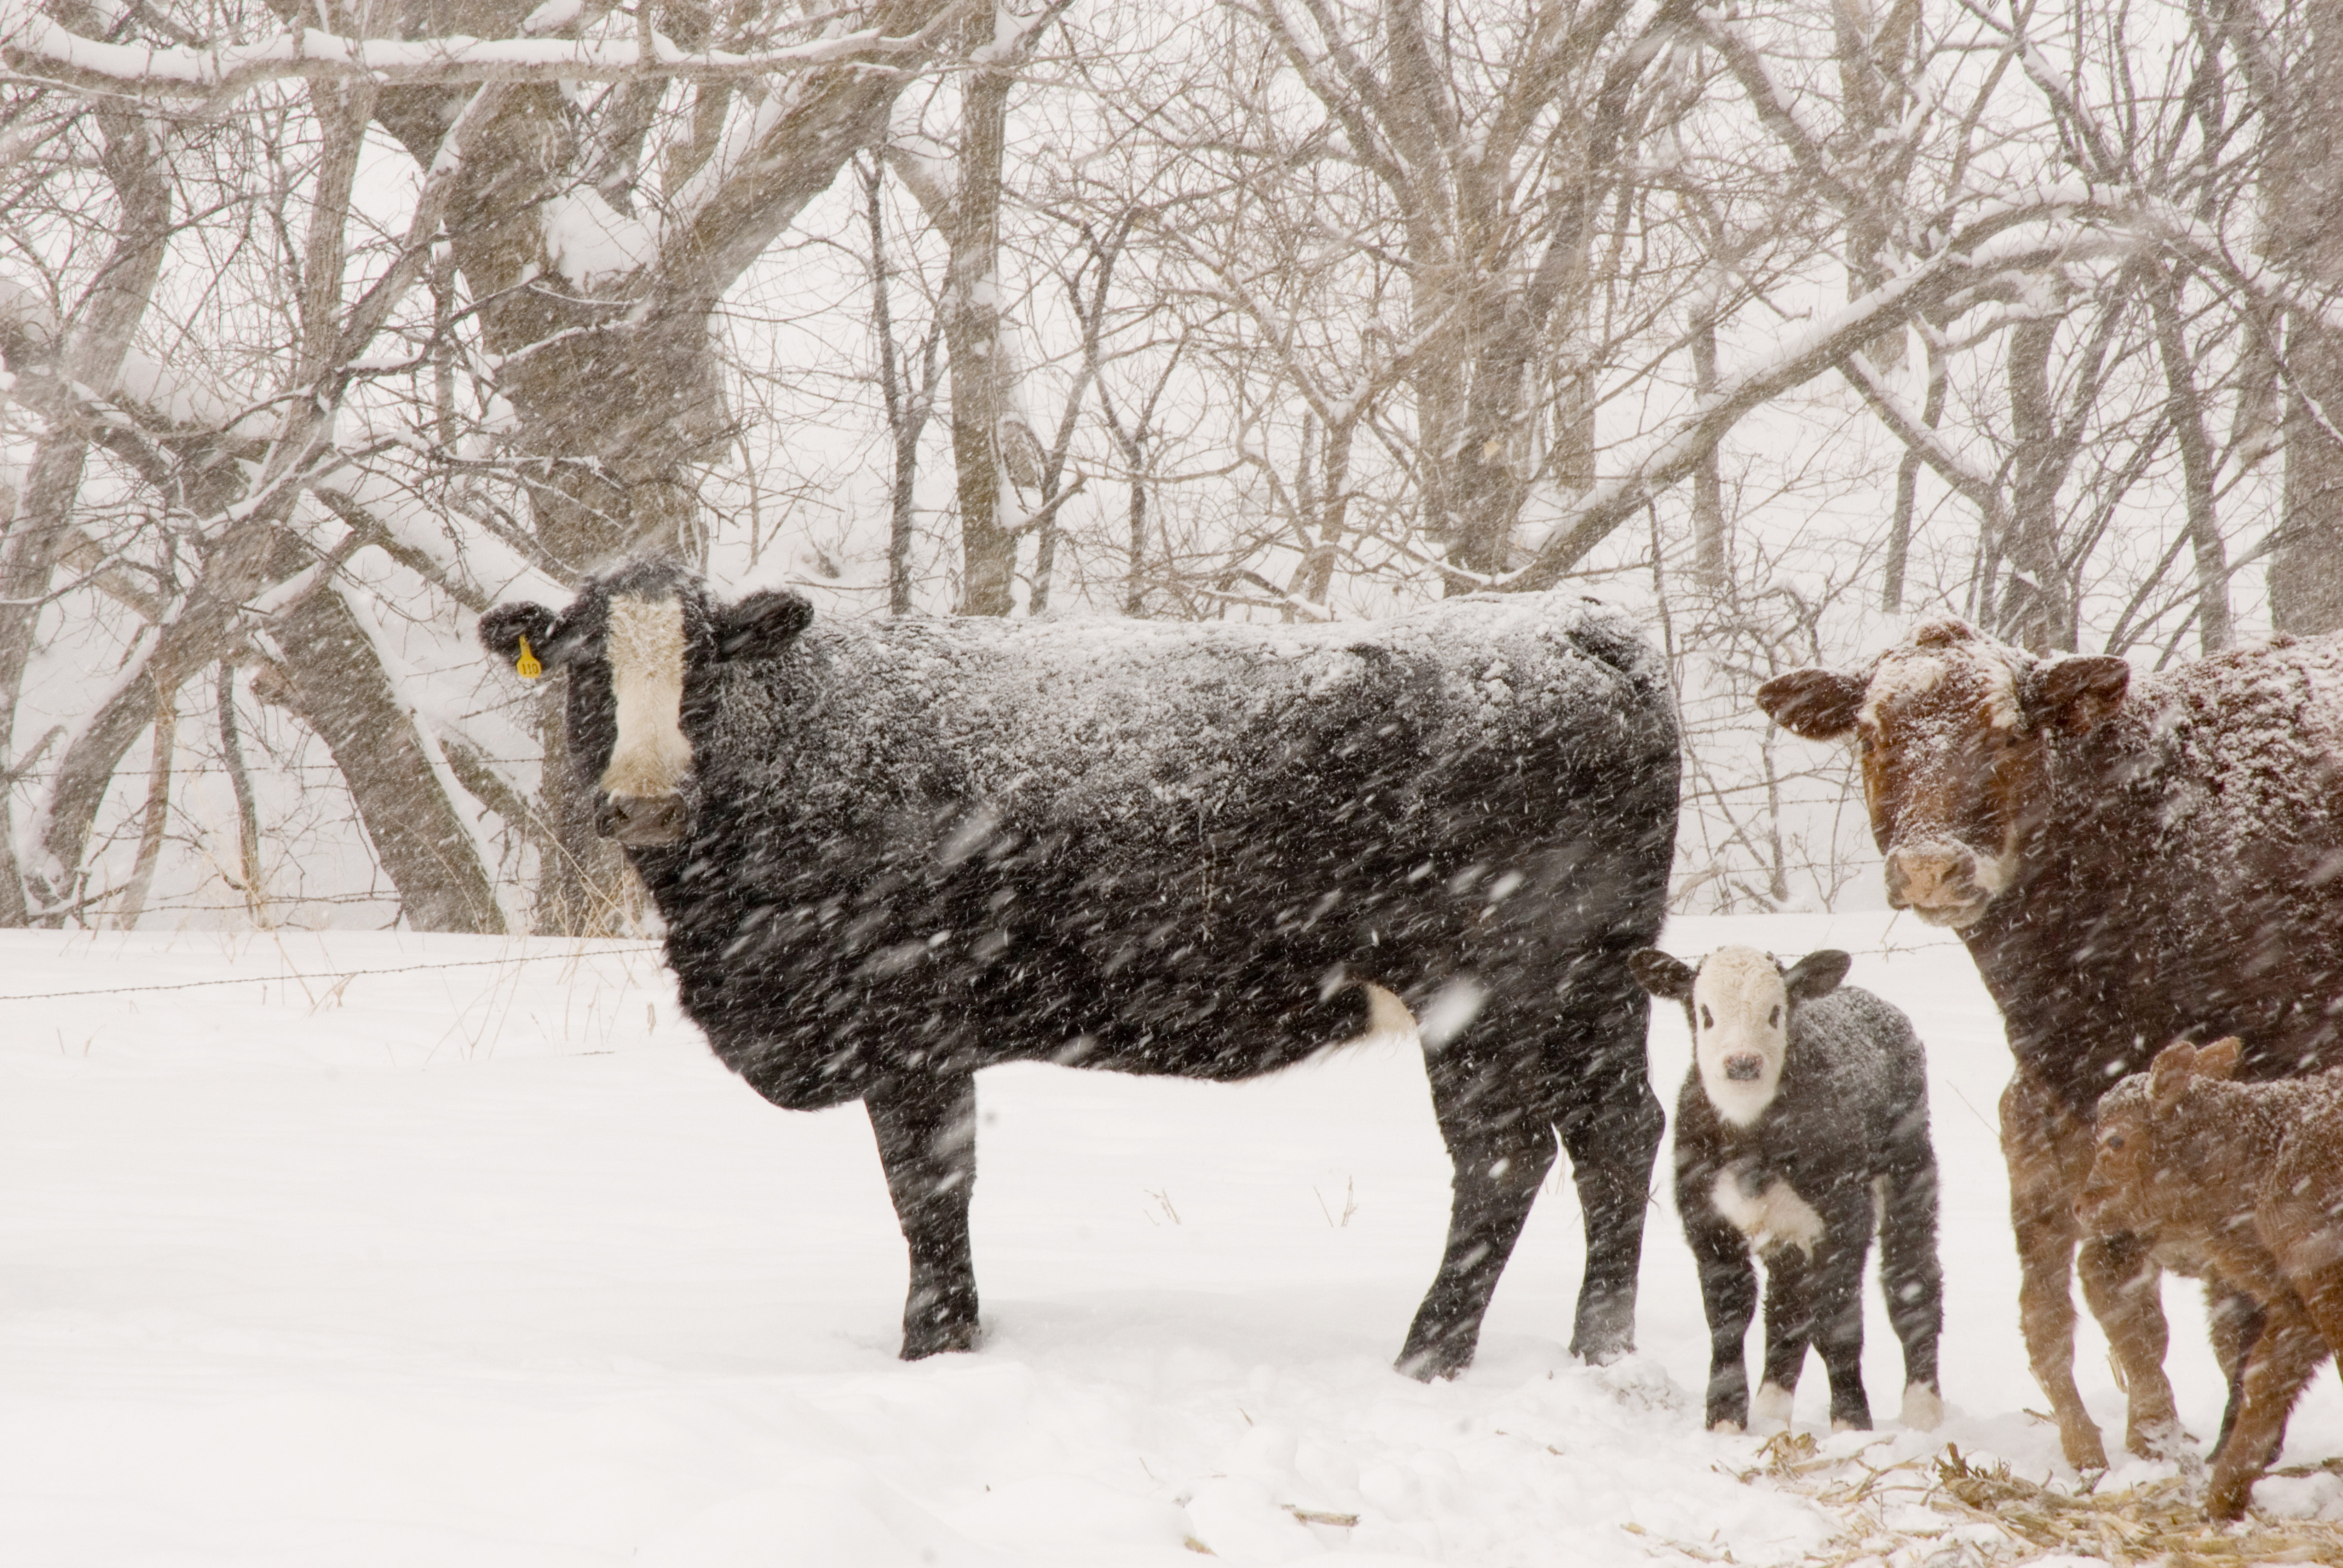 Re-warming Methods For Severely Cold-Stressed Newborn Calves